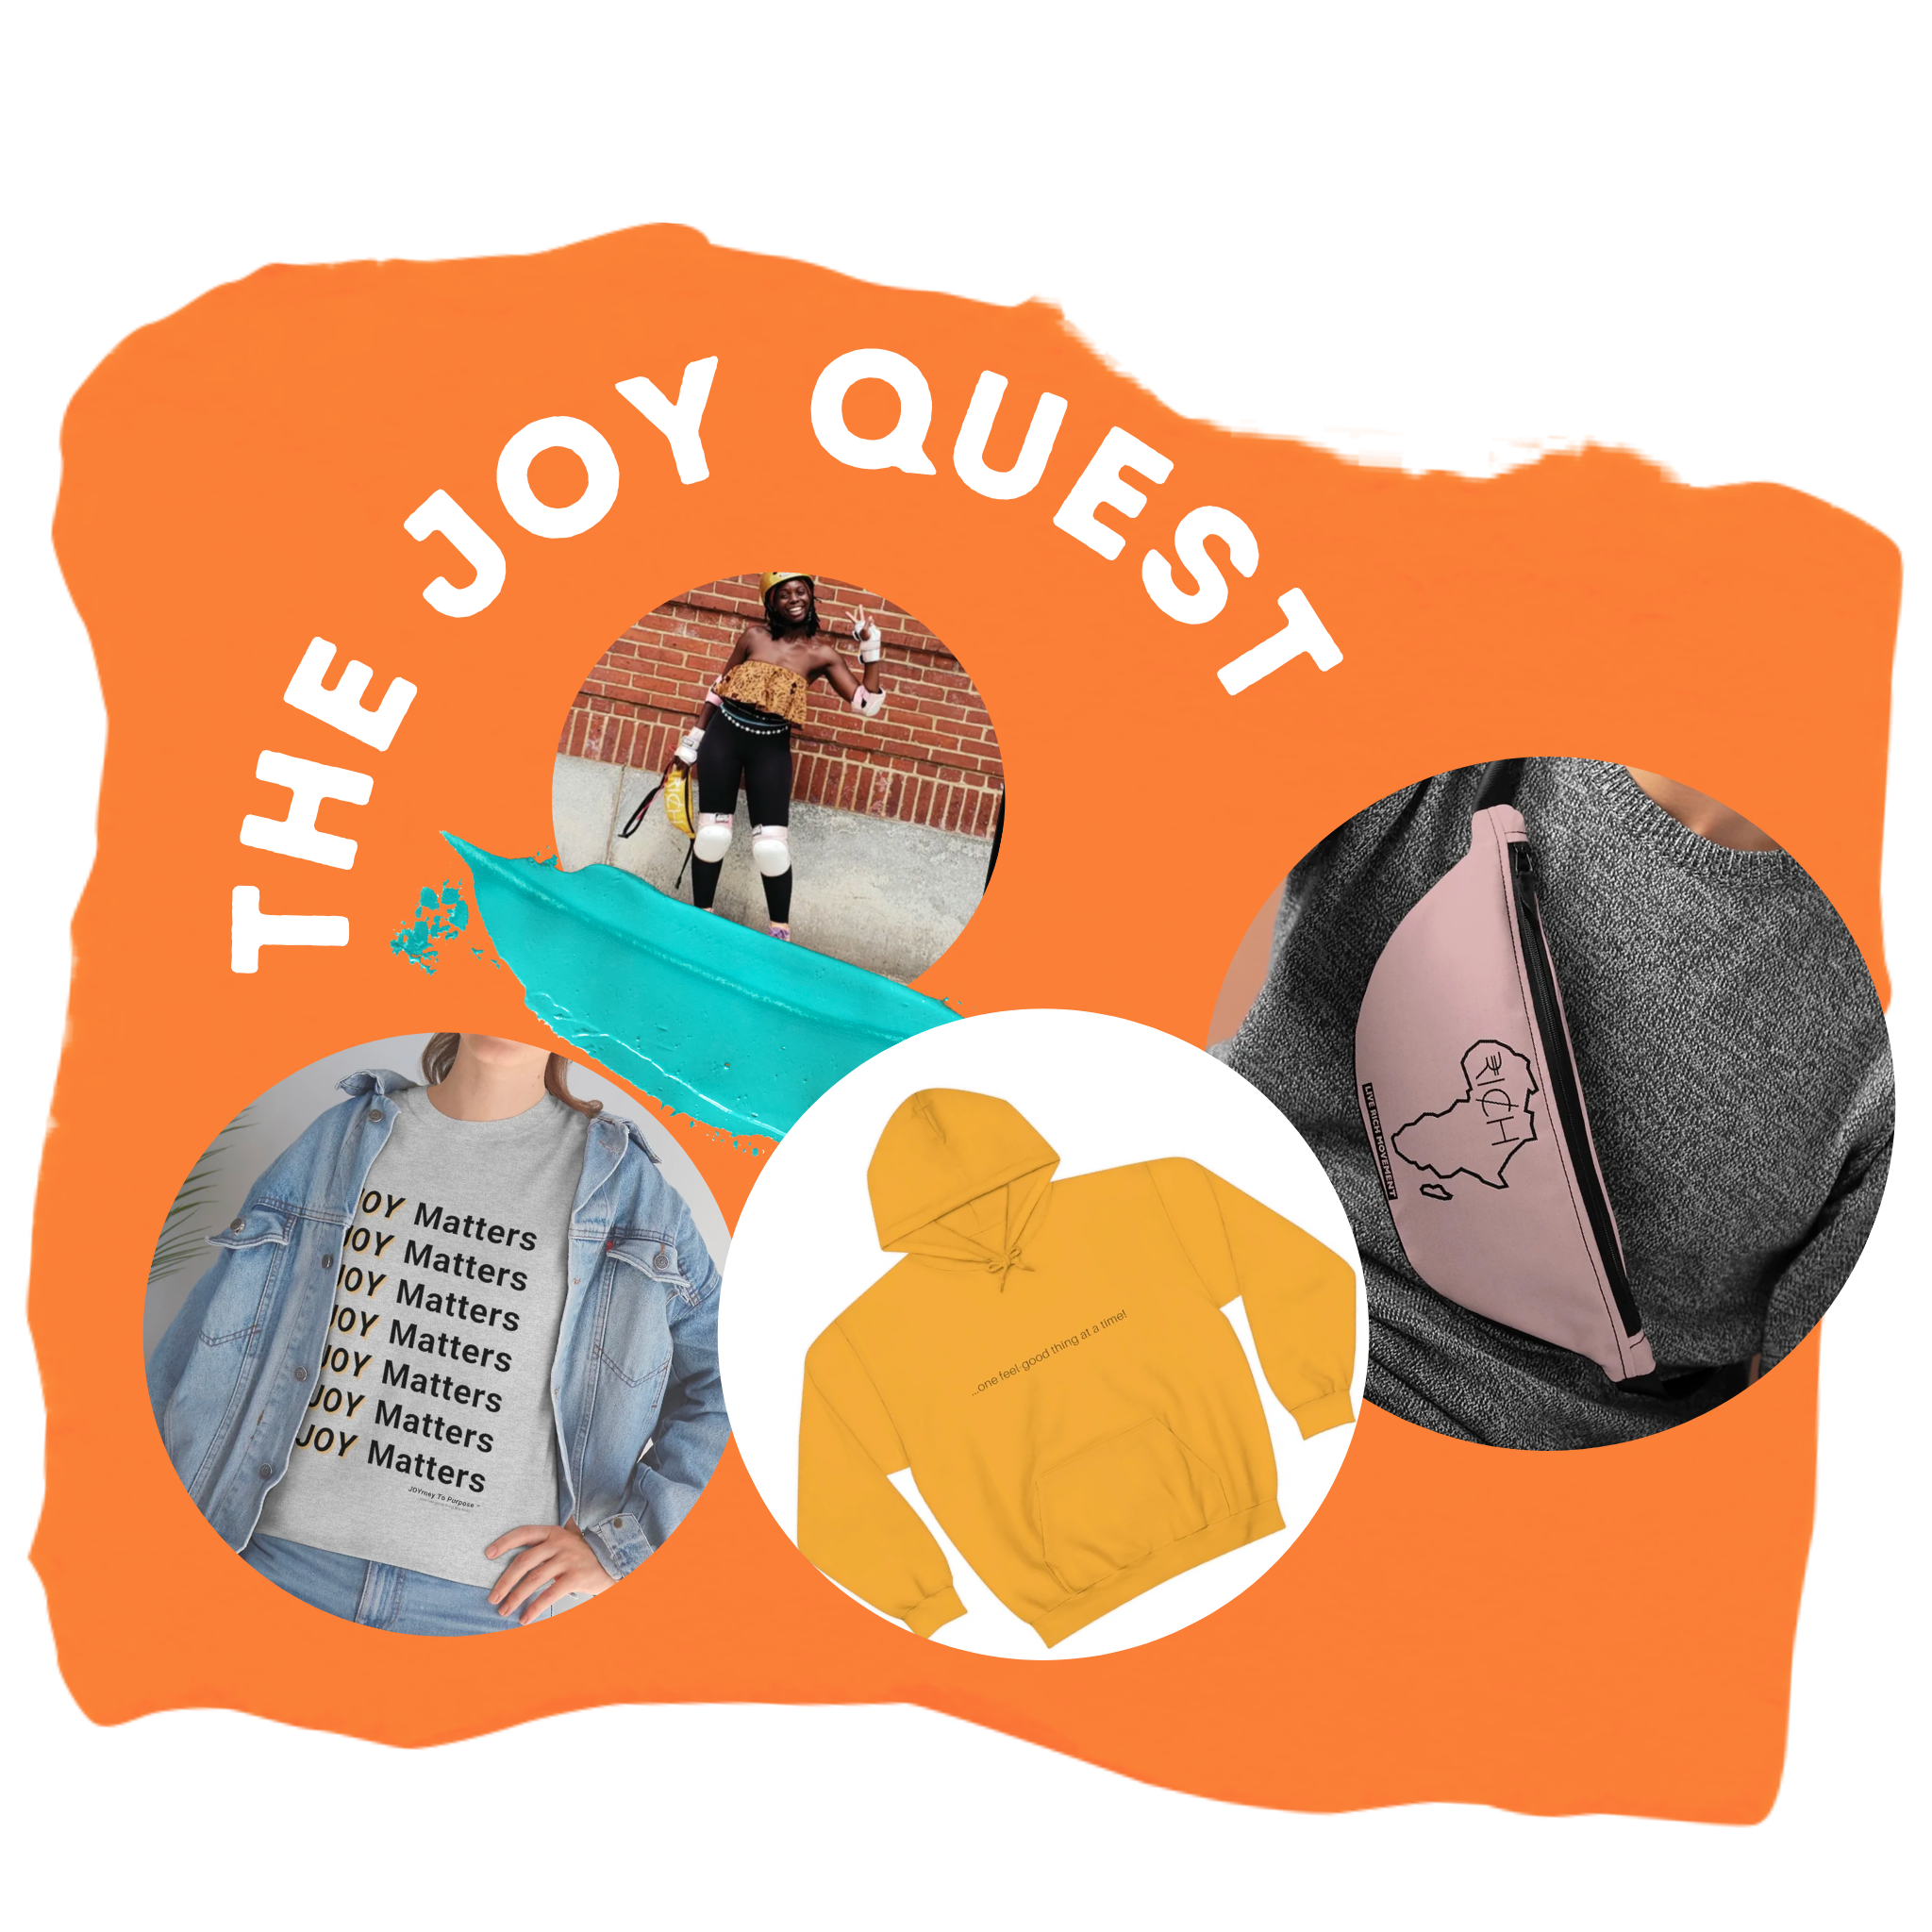 links to website called the joy quest